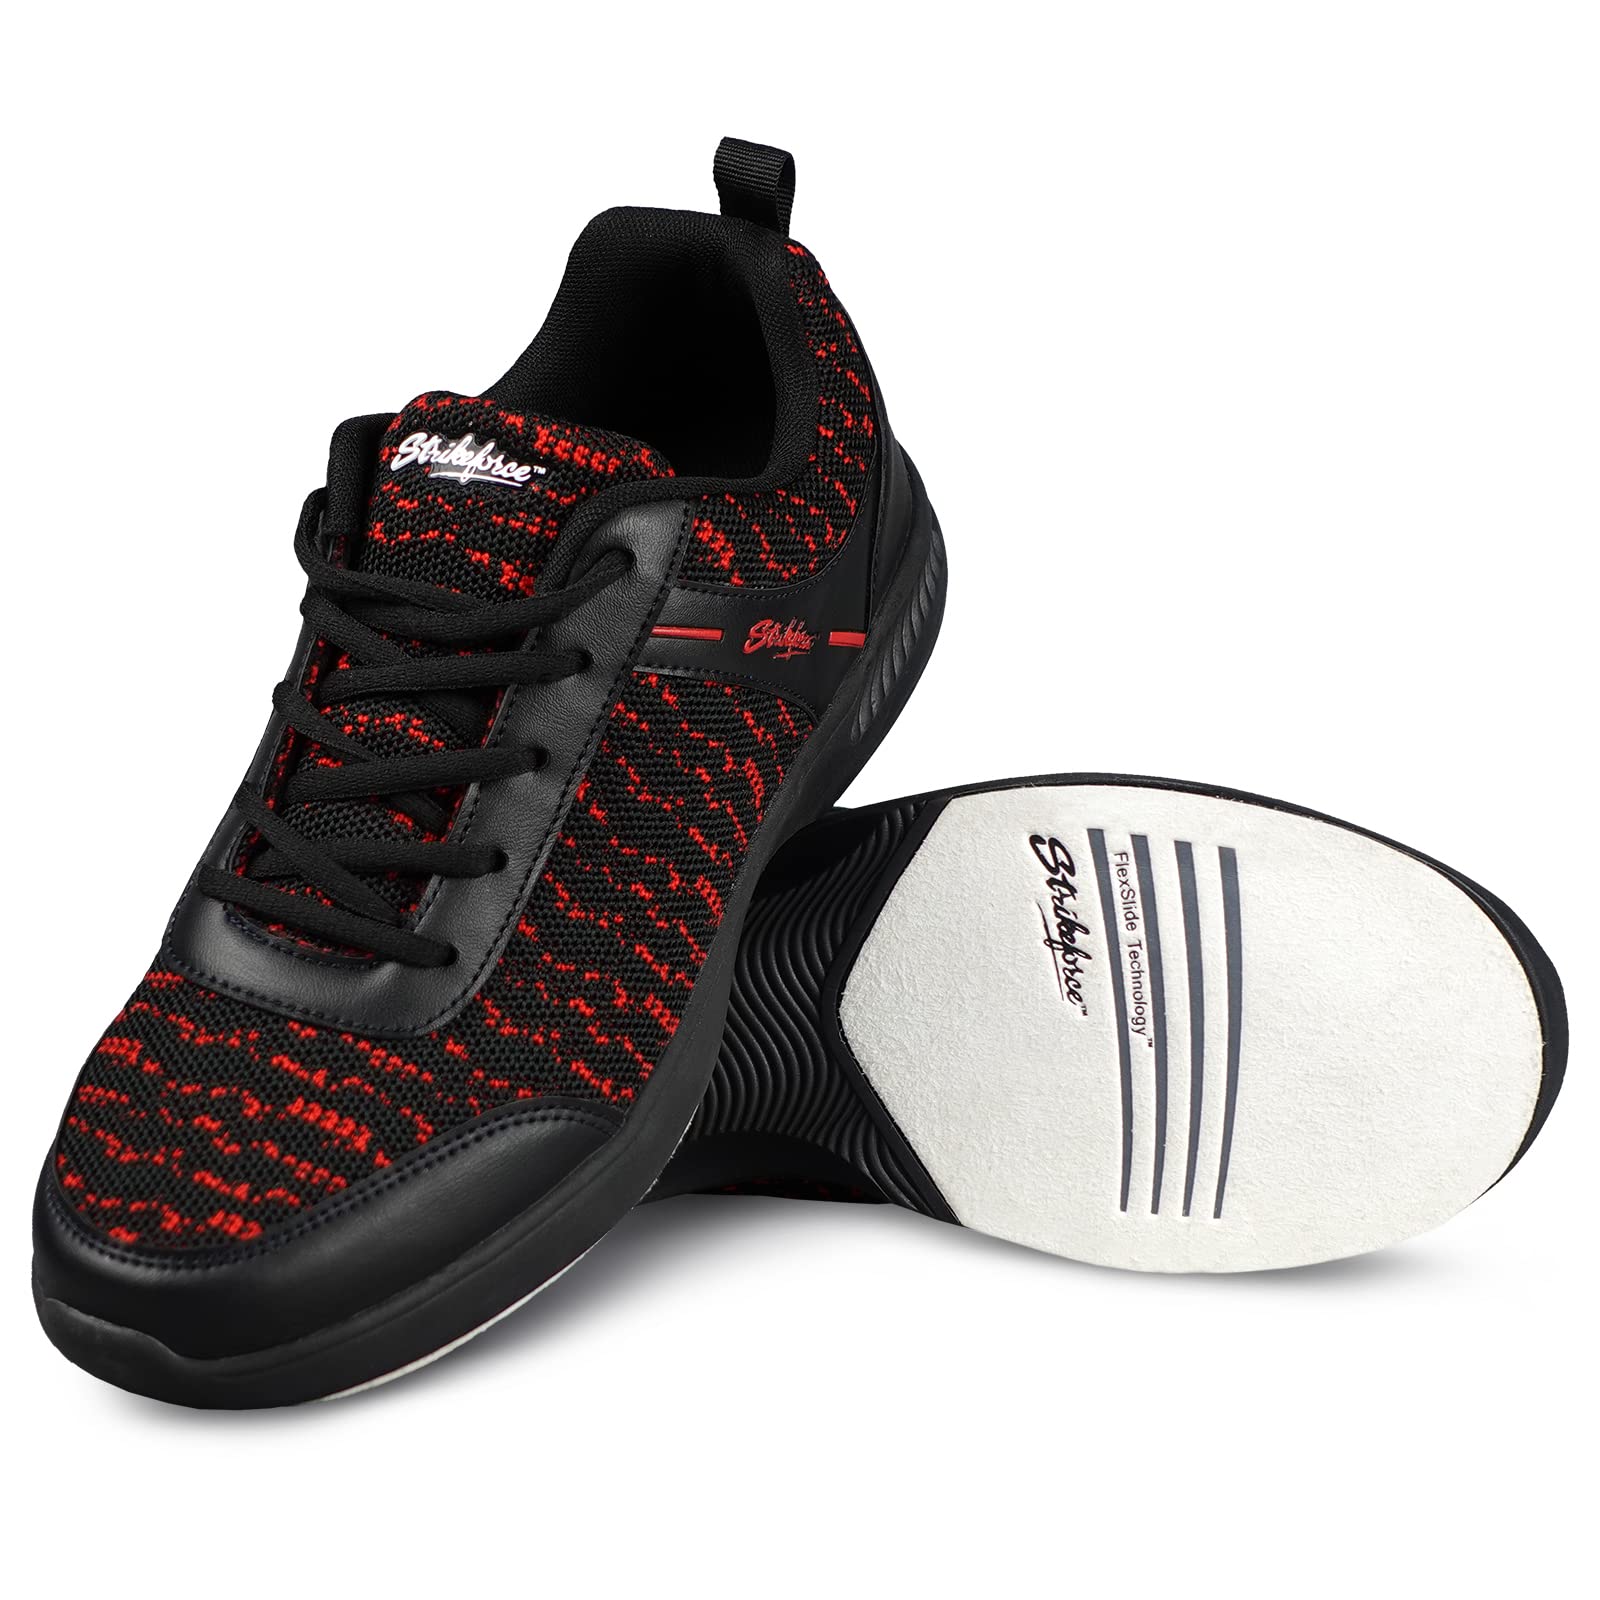 KR Strikeforce Flyer Mesh Lite Black Cardinal Medium Width Size 7 Men's Athletic Style Bowling Shoes with FlexSlide Technology for Right or Left Handed Bowlers (M-073)